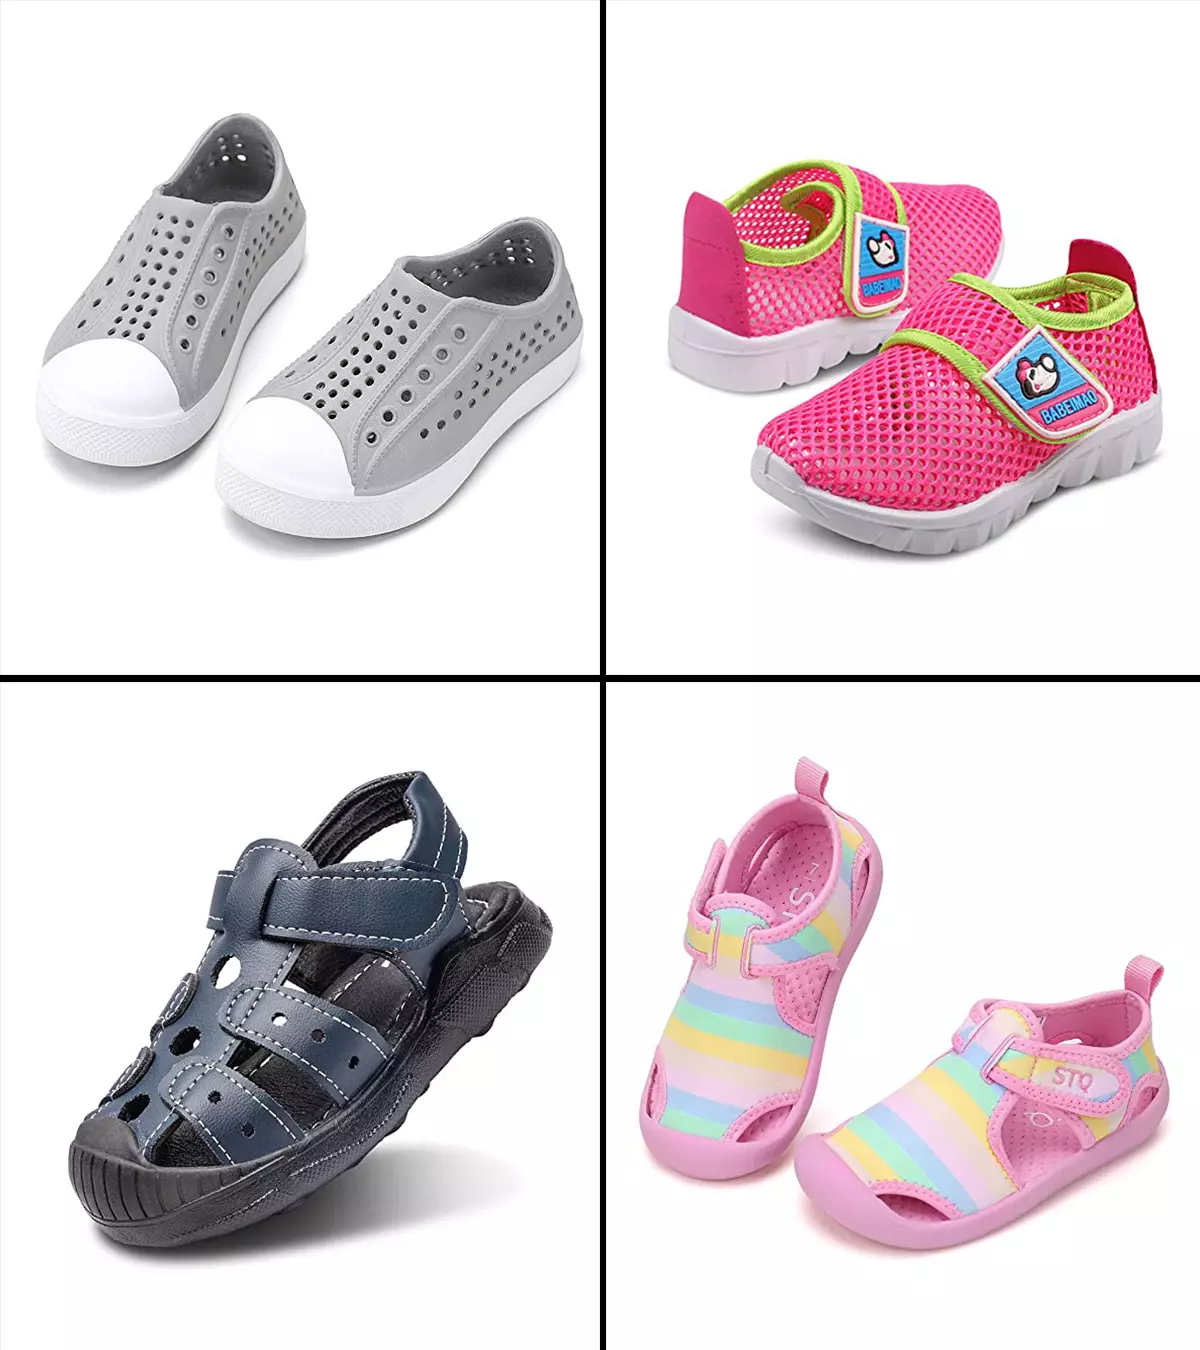 Beach sandals to open-toe sandals, the perfect pal for your child's feet on hot days.